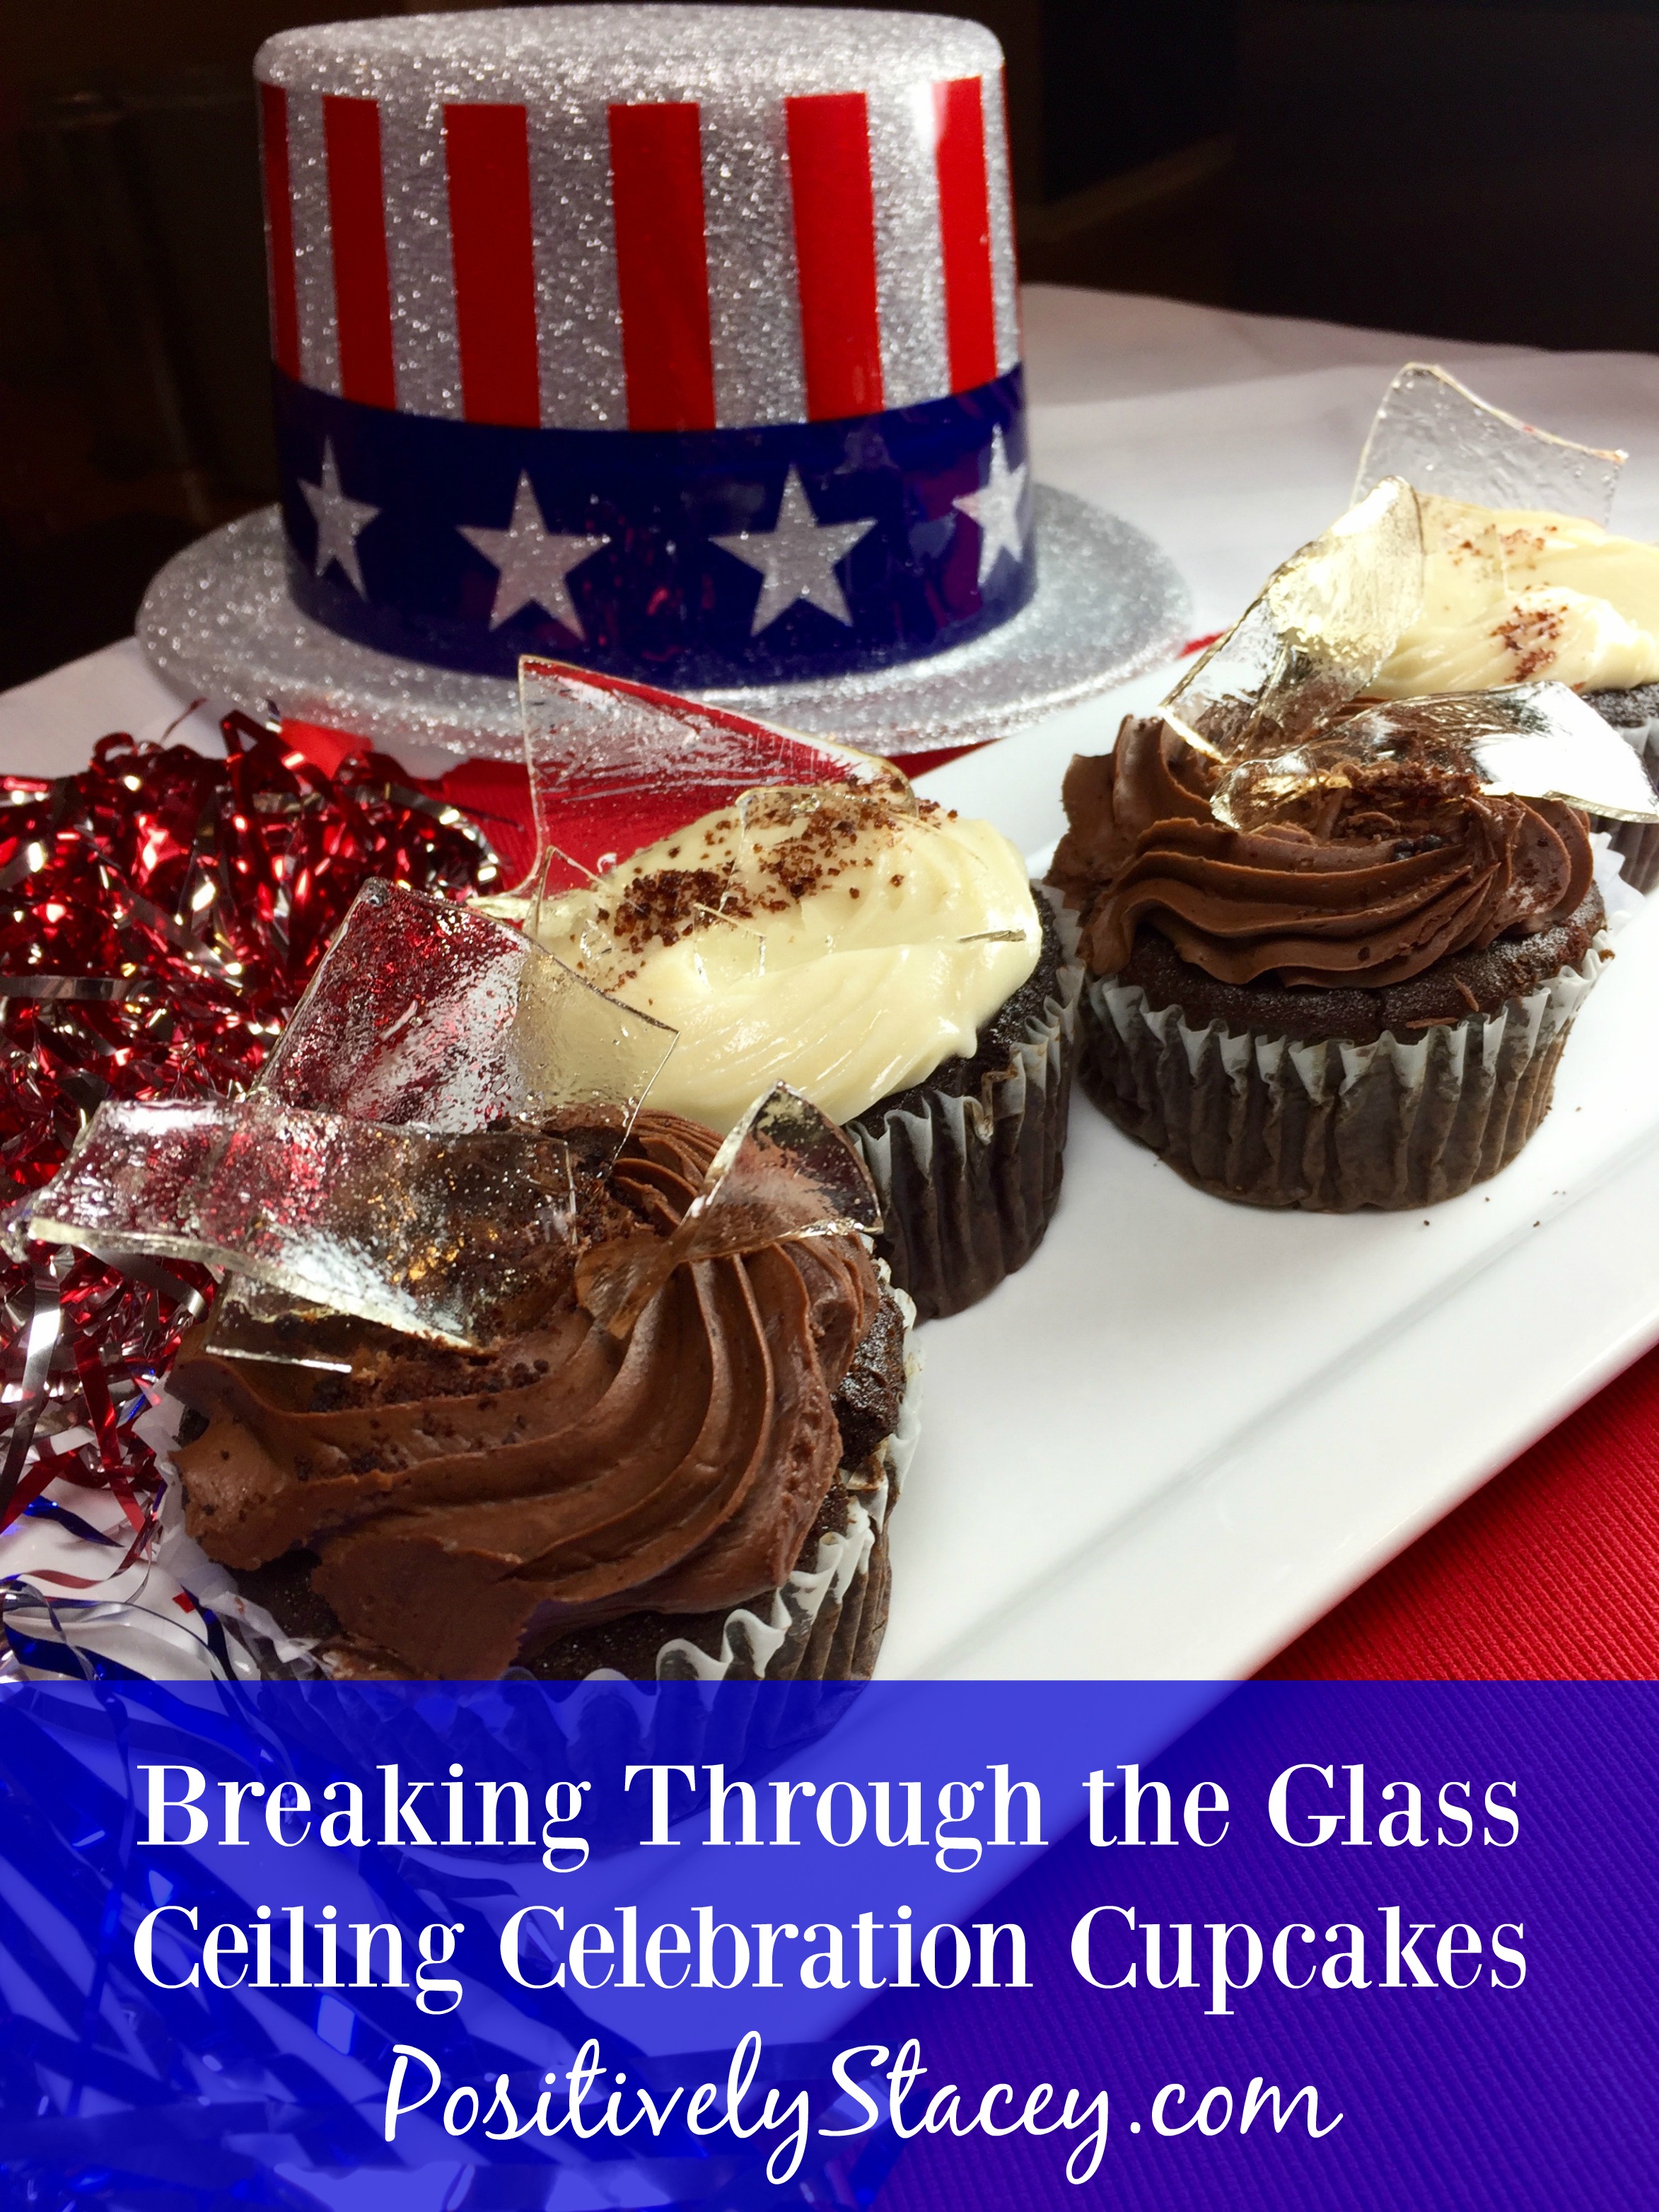 breaking-through-the-glass-ceiling-celebration-cupcakes